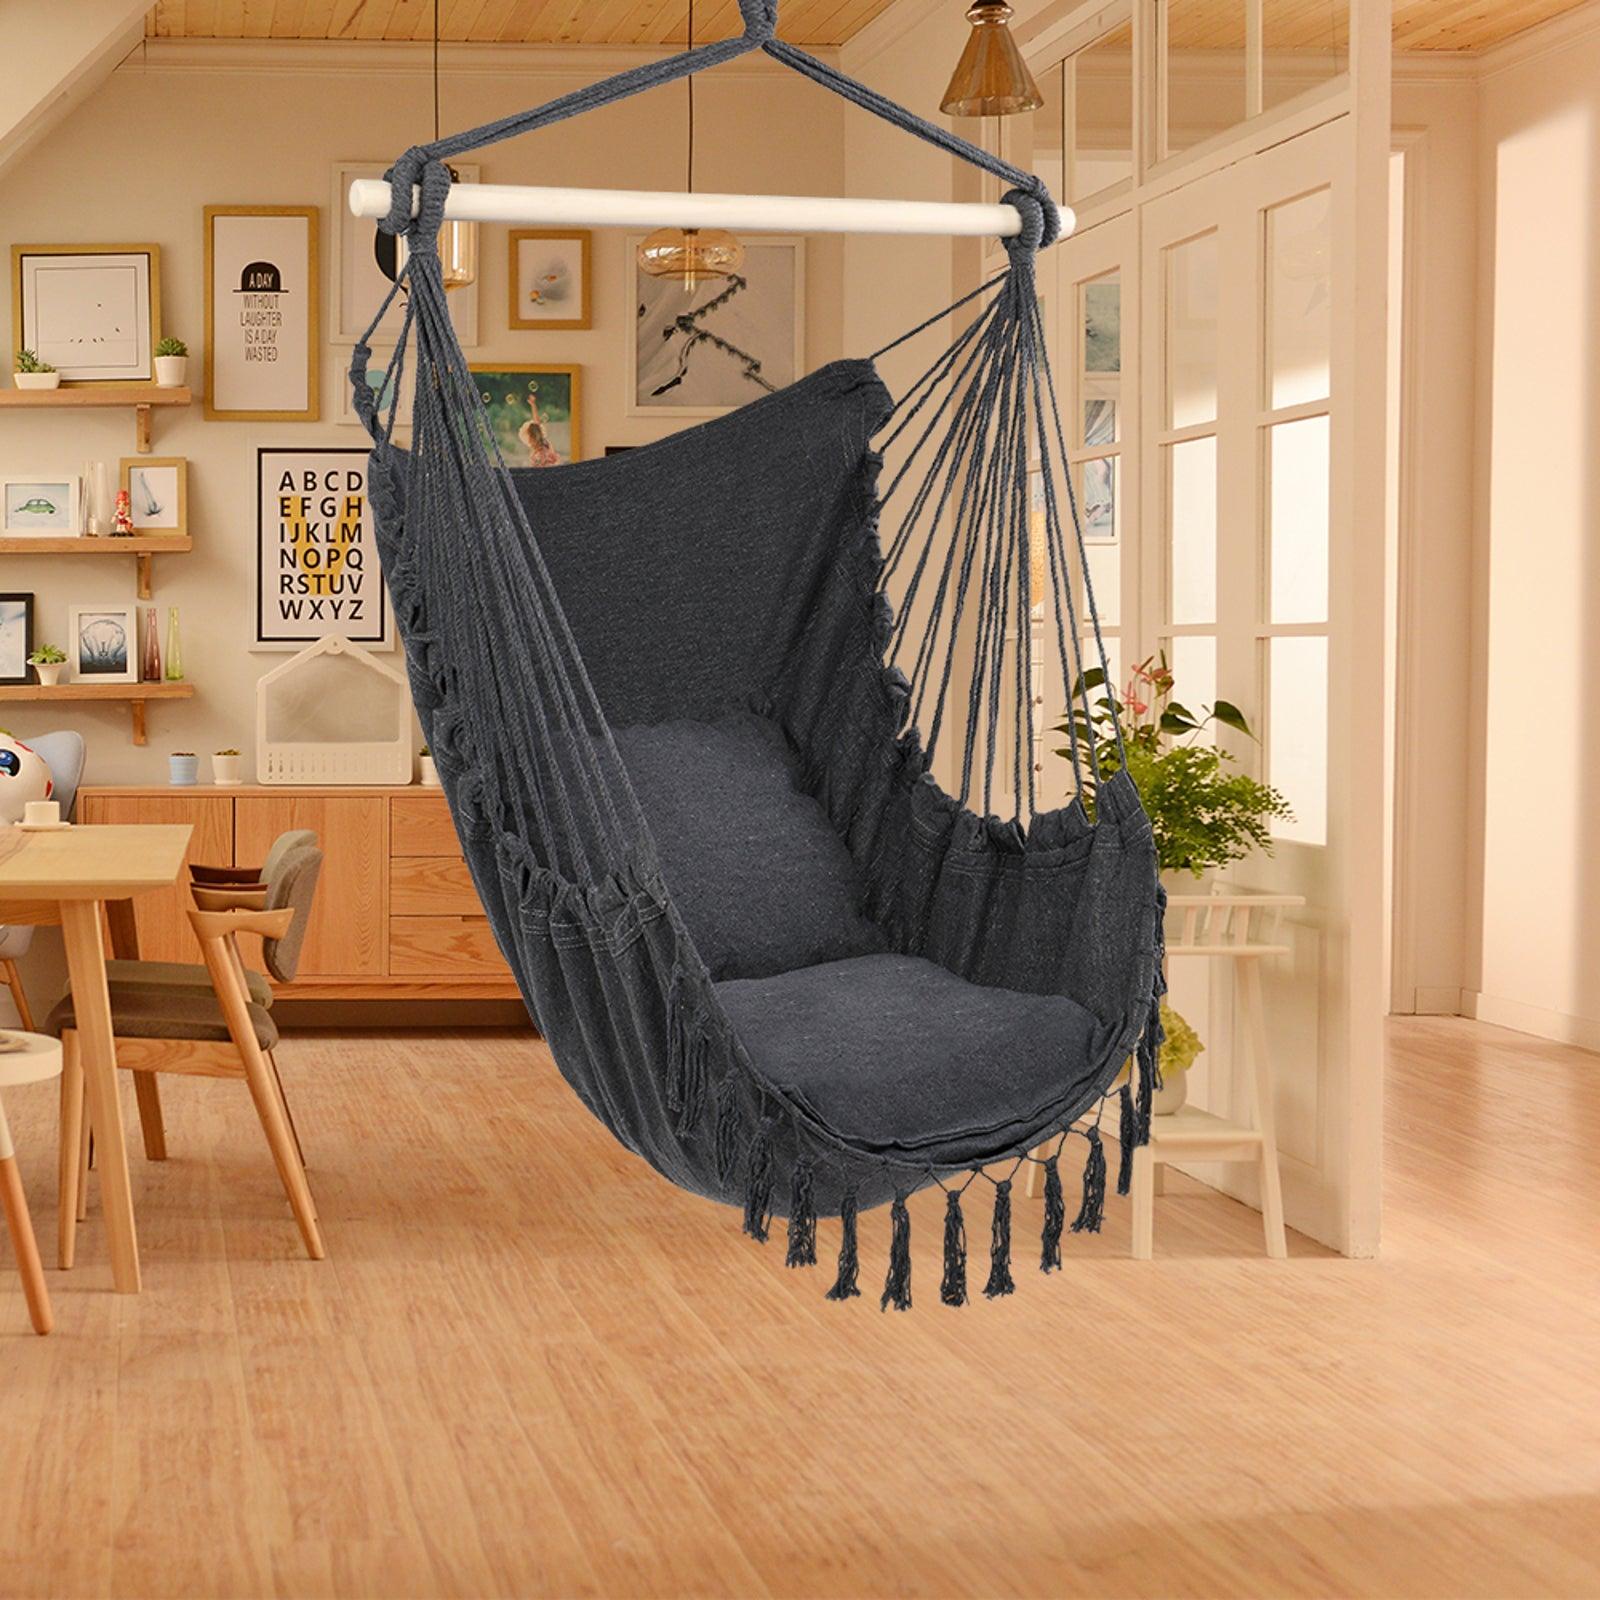 Hanging Chair Dark / Hammock Swing Chair / Canvass Cotton Tassel Rope With Pillows (Grey) - Charming Spaces